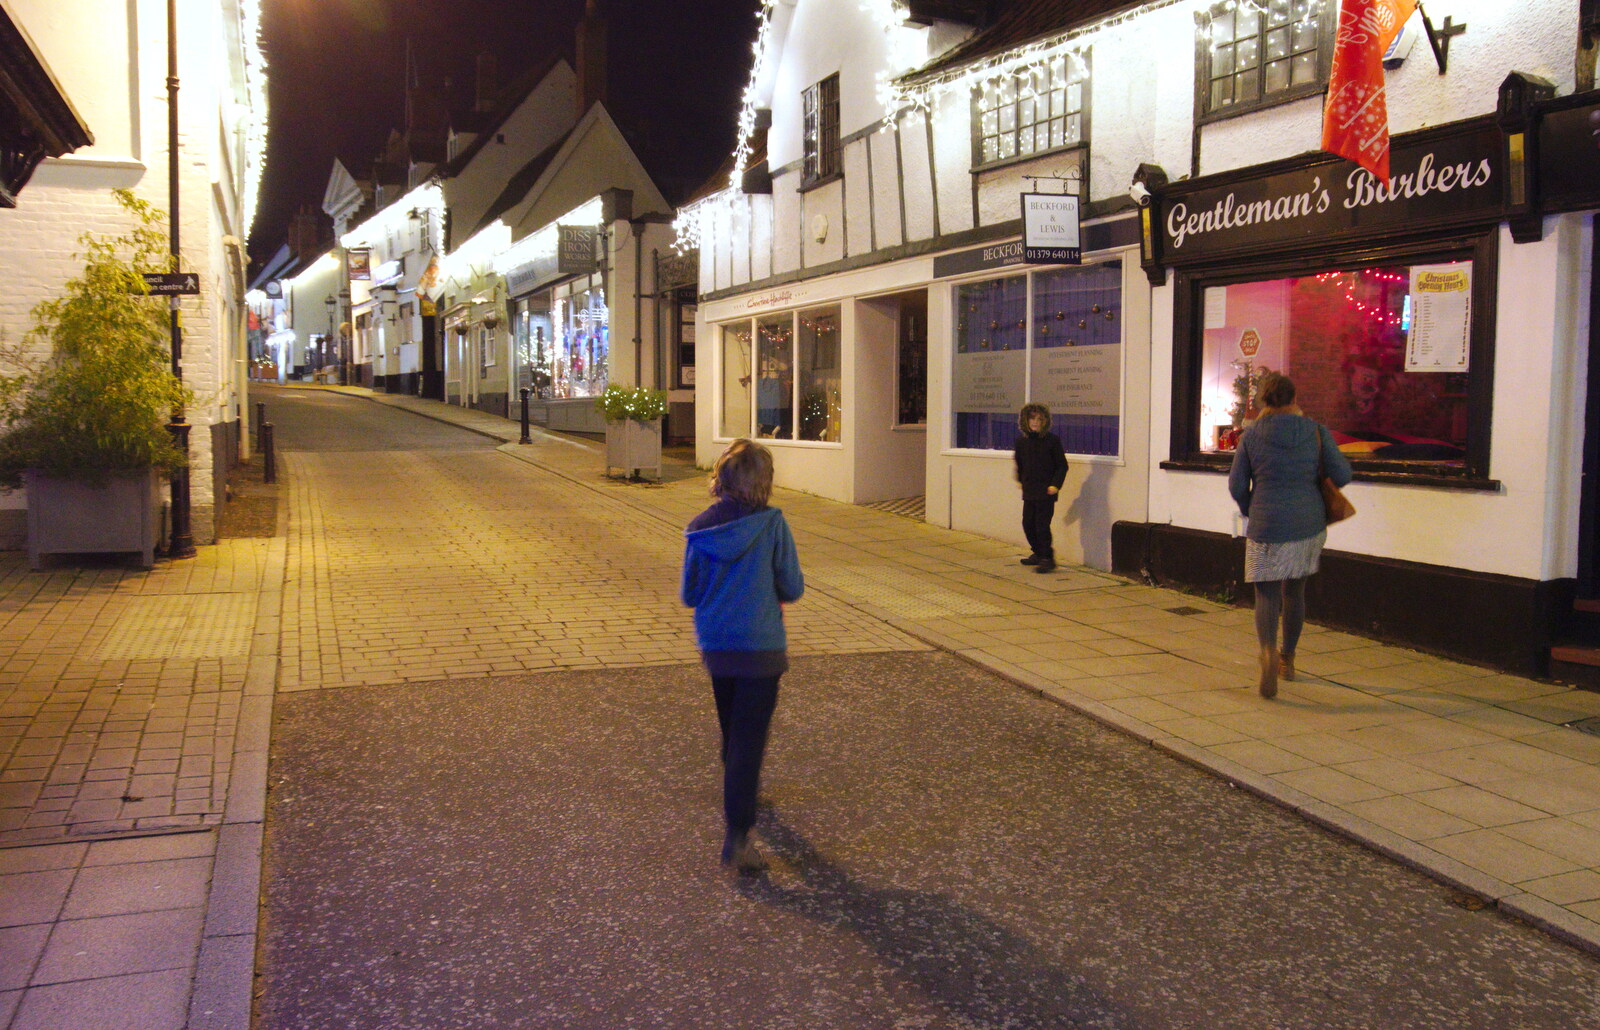 More roaming around from Diss Panto and the Christmas Lights, Diss, Norfolk - 27th December 2019